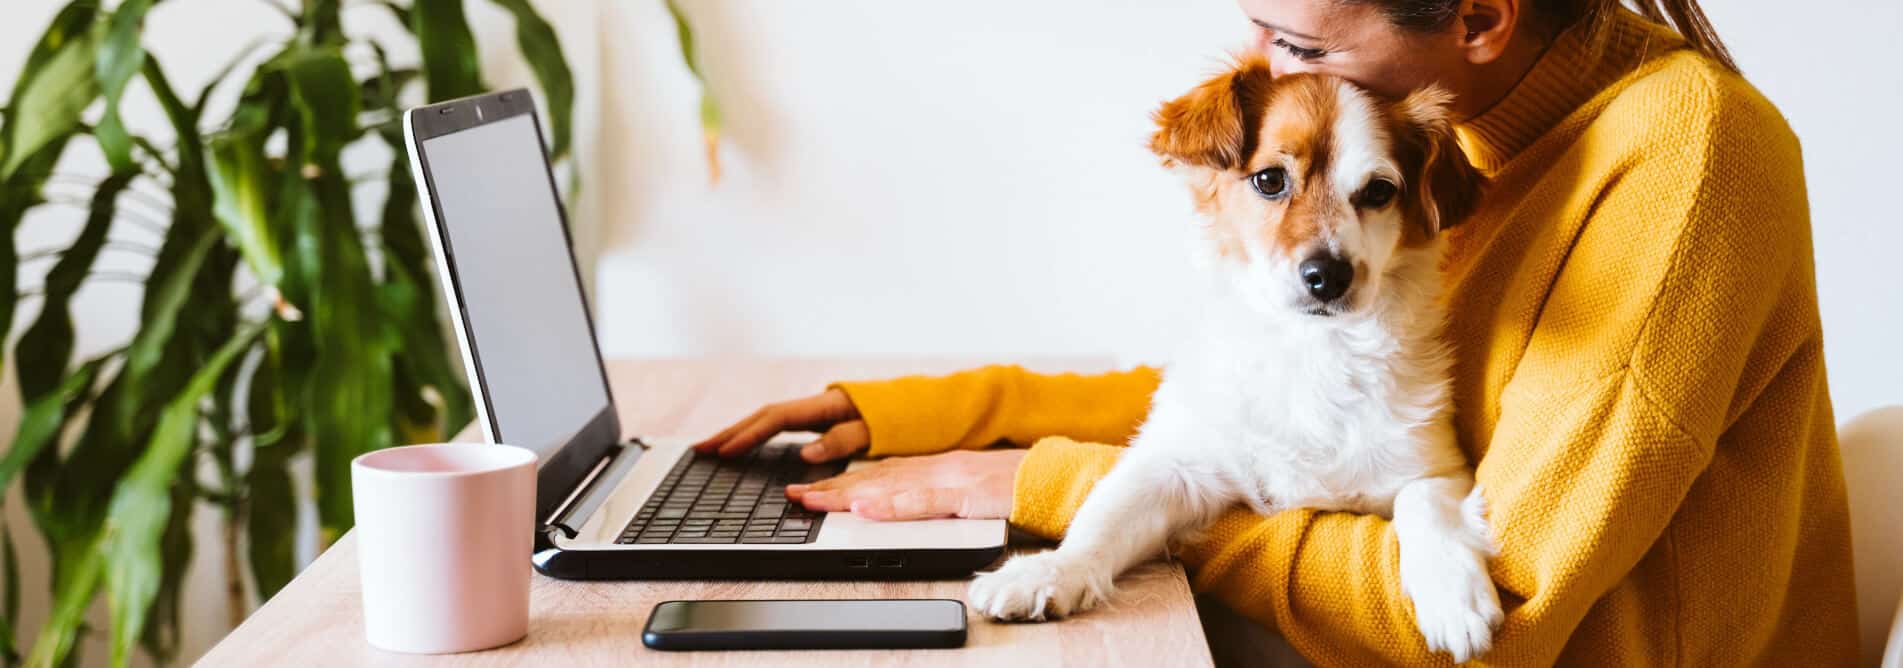 Dog in front of laptop